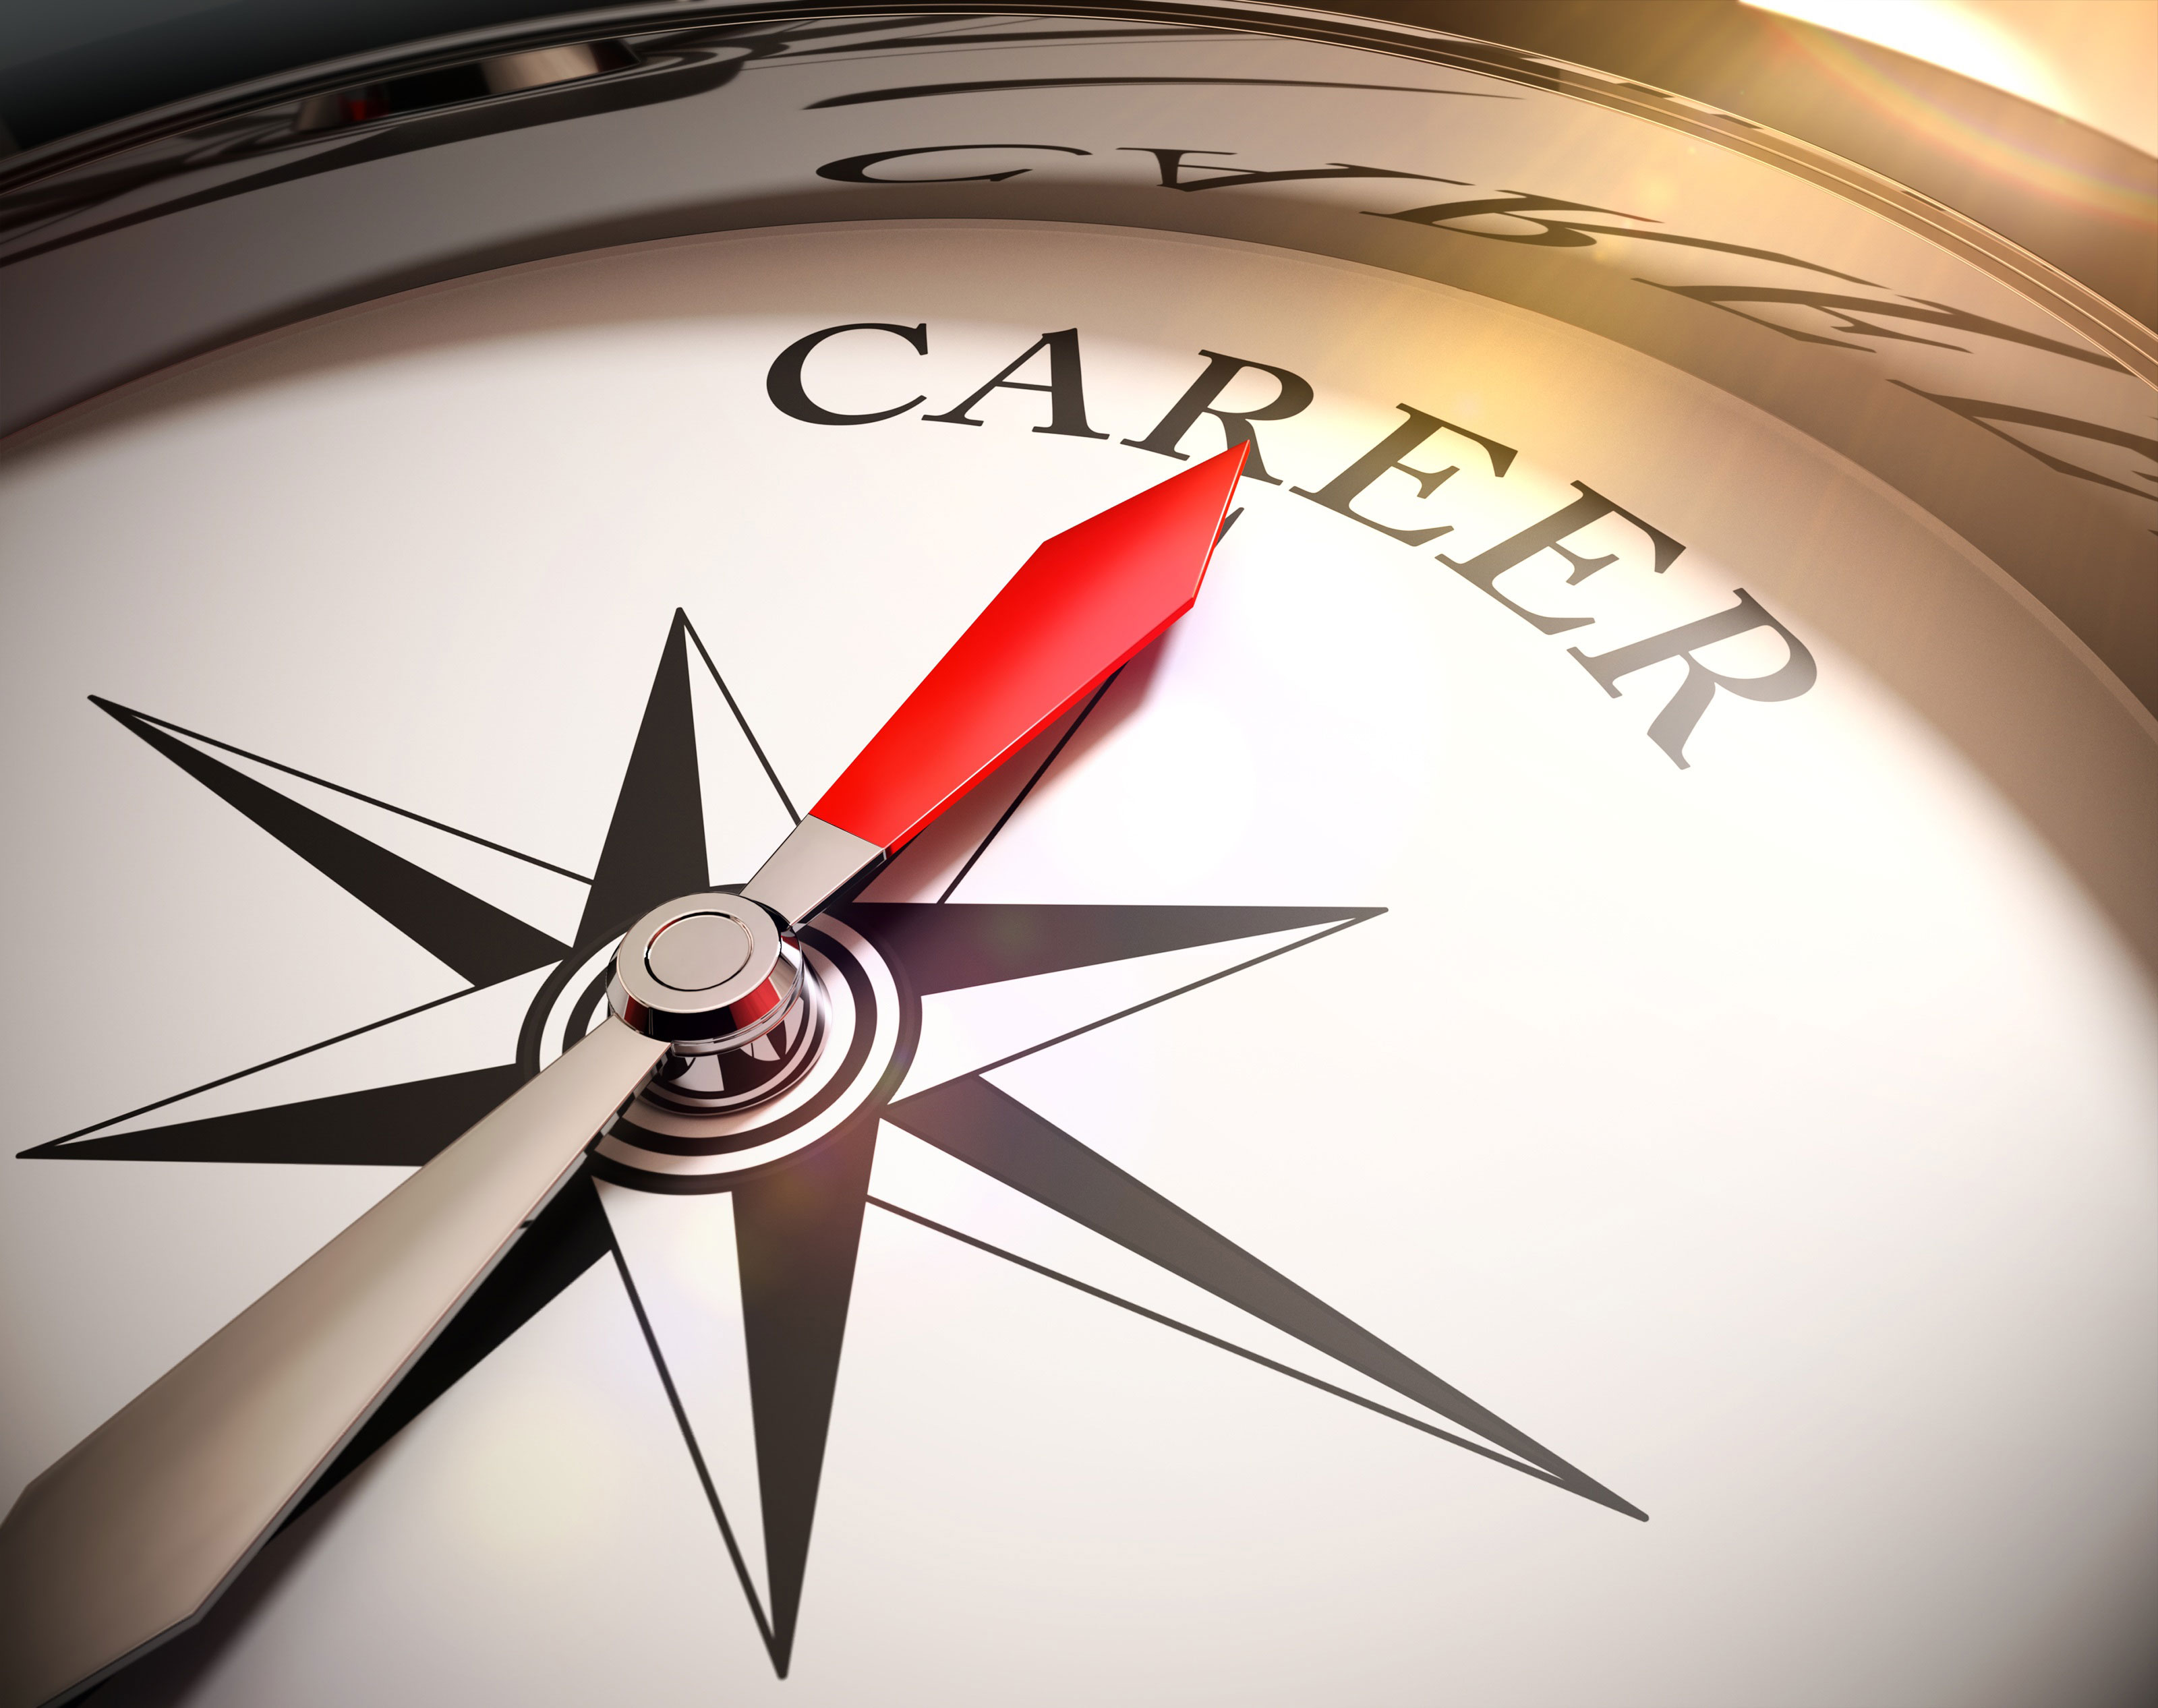 compass face with red needle pointing towards the text "career"